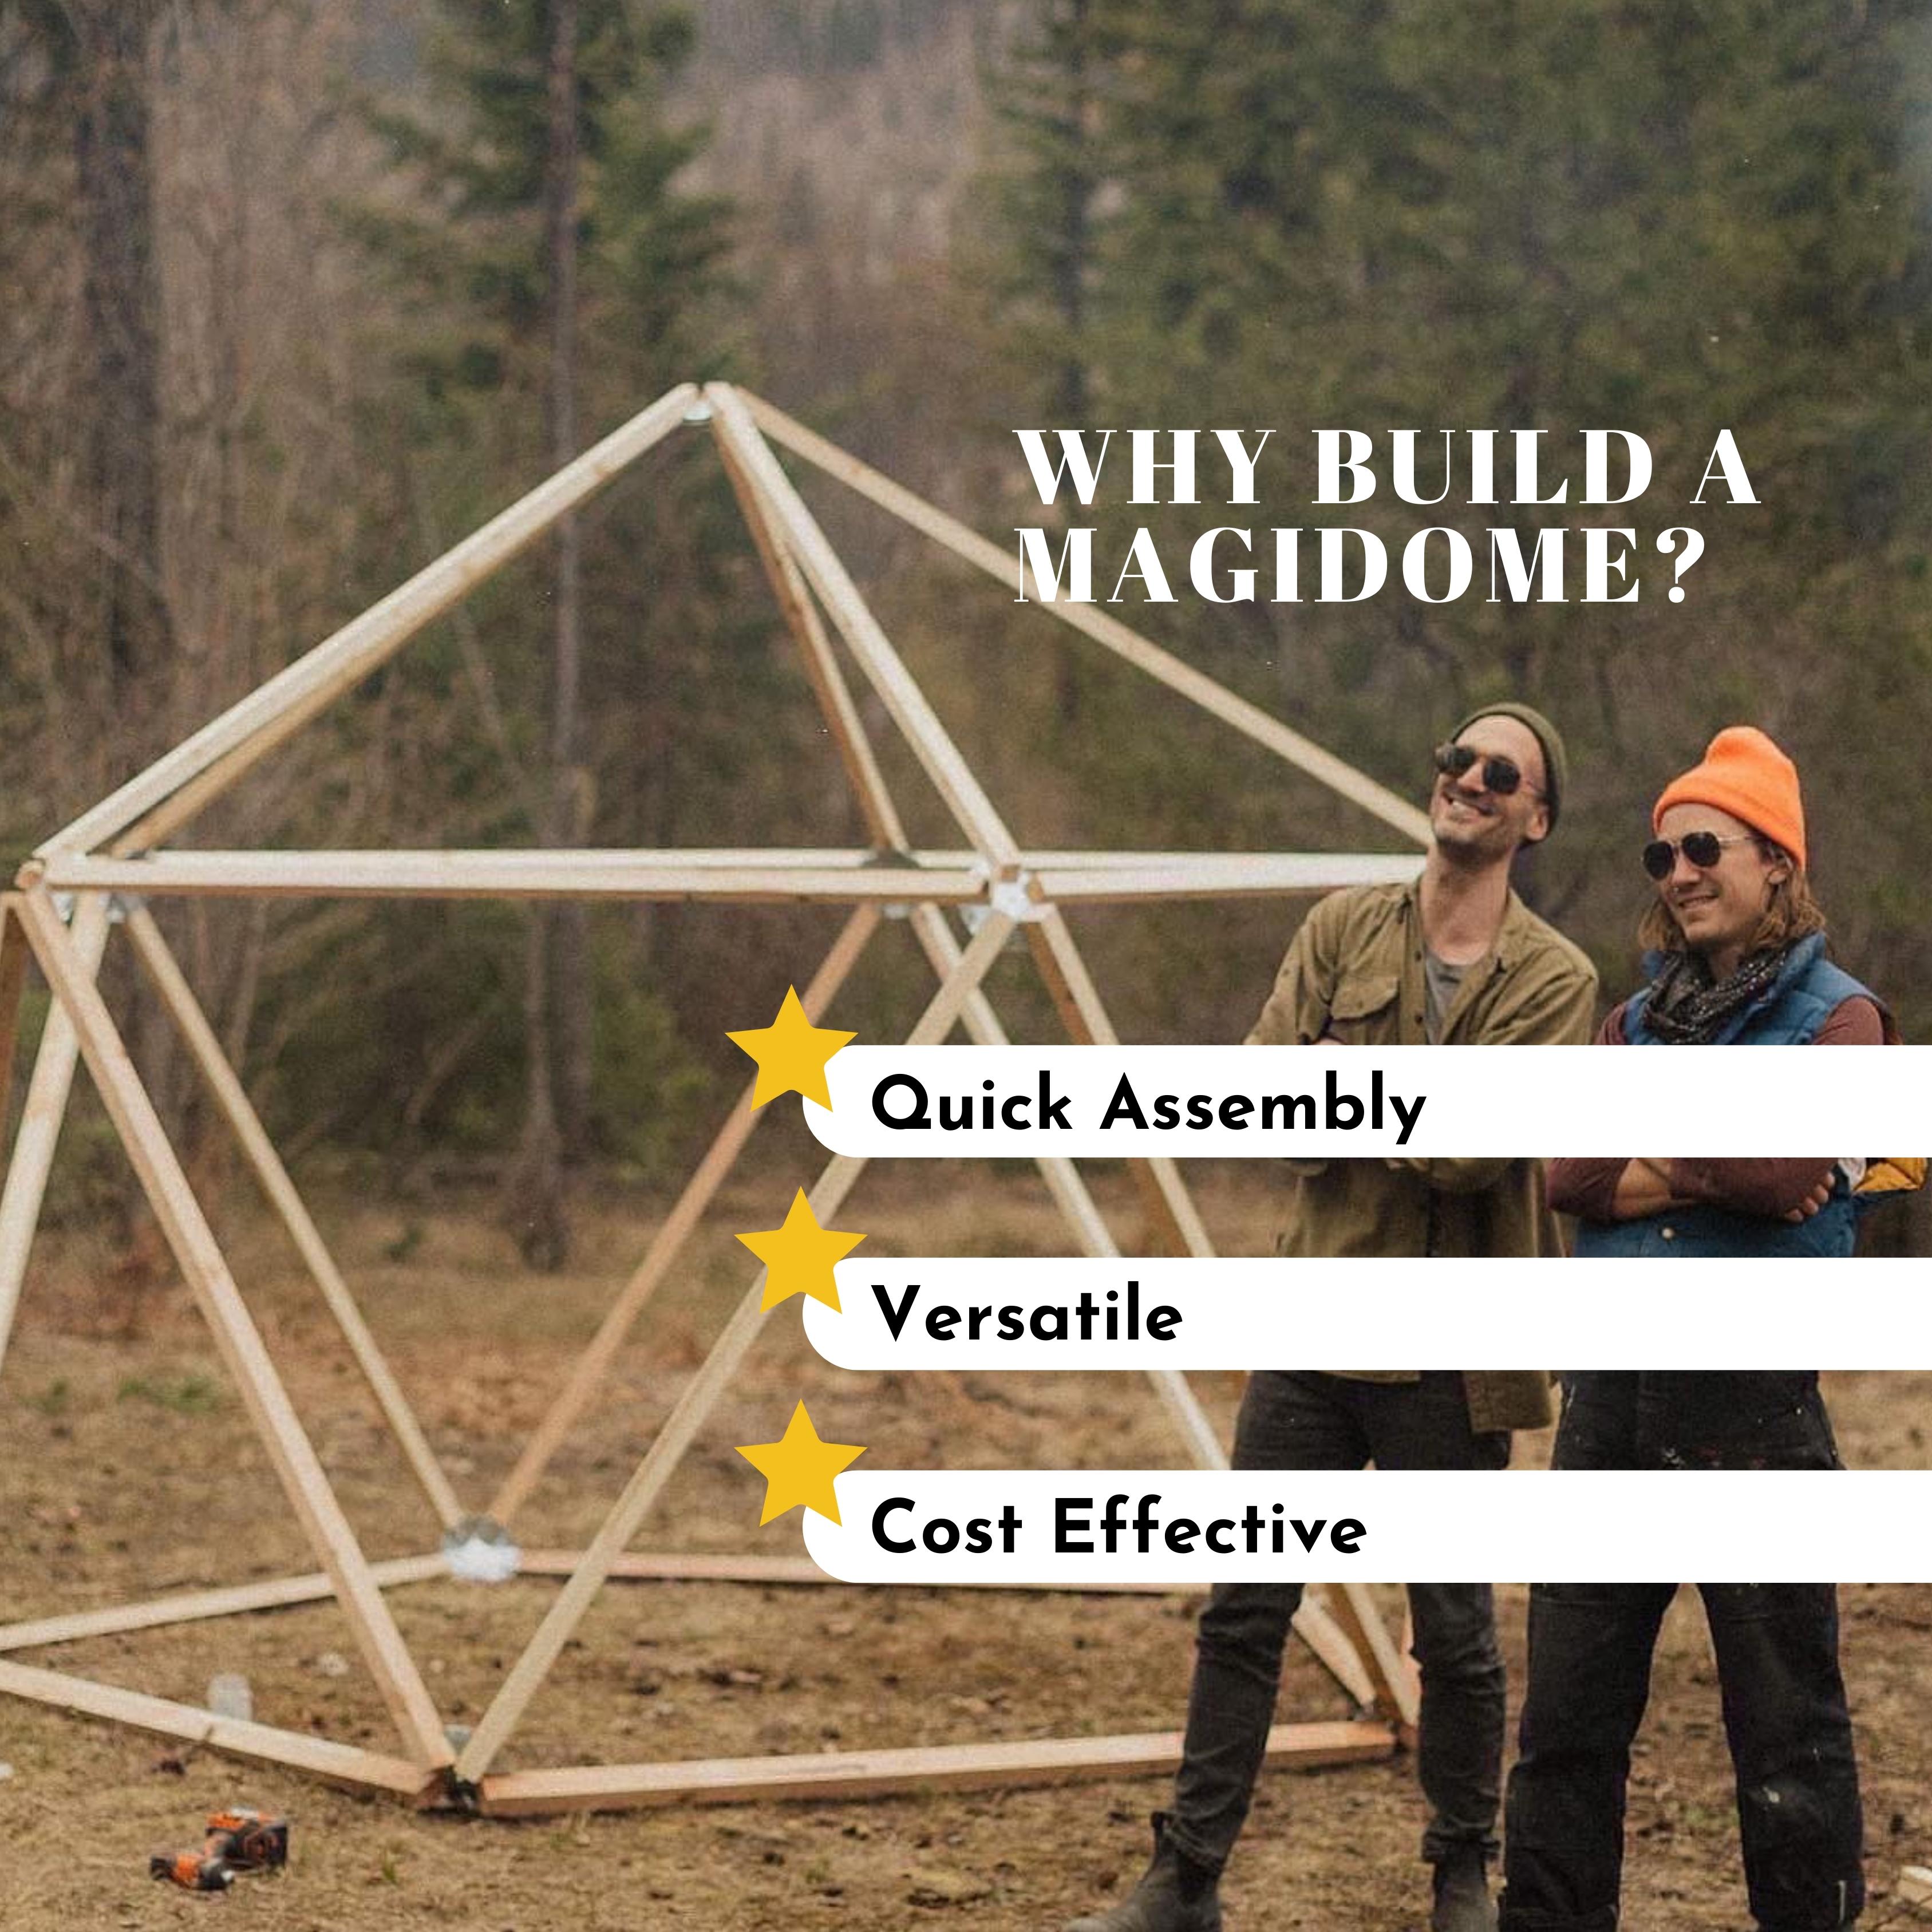 The Best geodesic dome connectors for 1v domes. Build a greenhouse, yurt, tent, chicken coop, mini camping dome, gazebo, or something amazing for the yard! Magidome makes it easy and affordable.